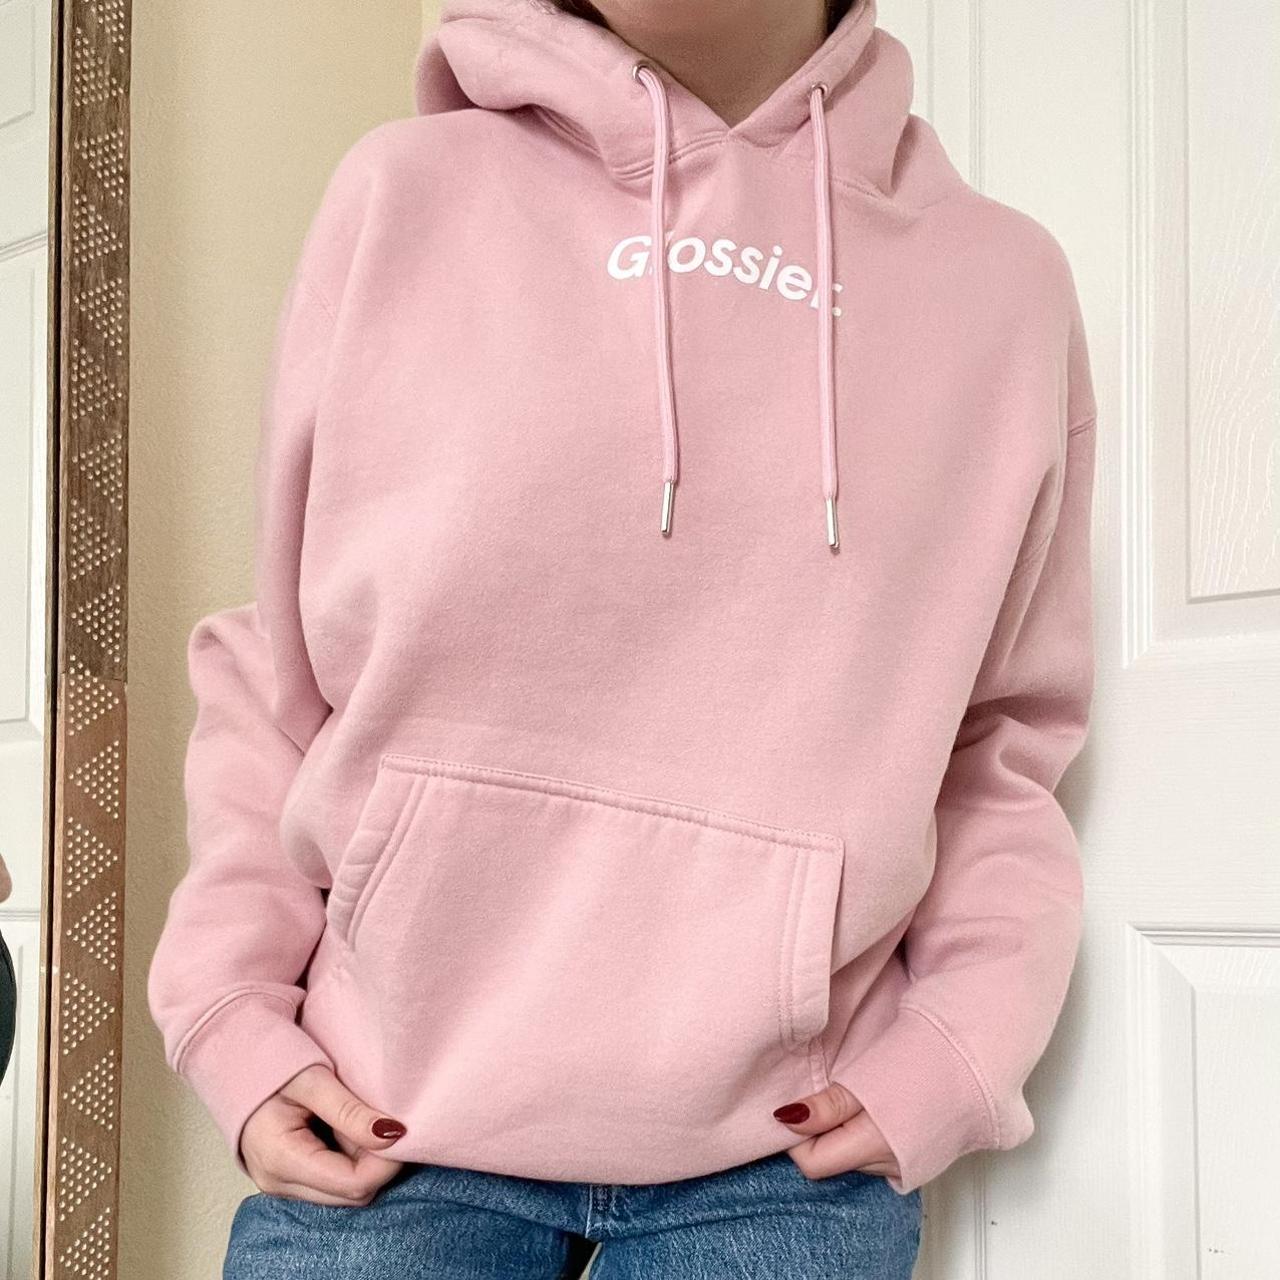 Glossier Women's Pink and White Hoodie | Depop